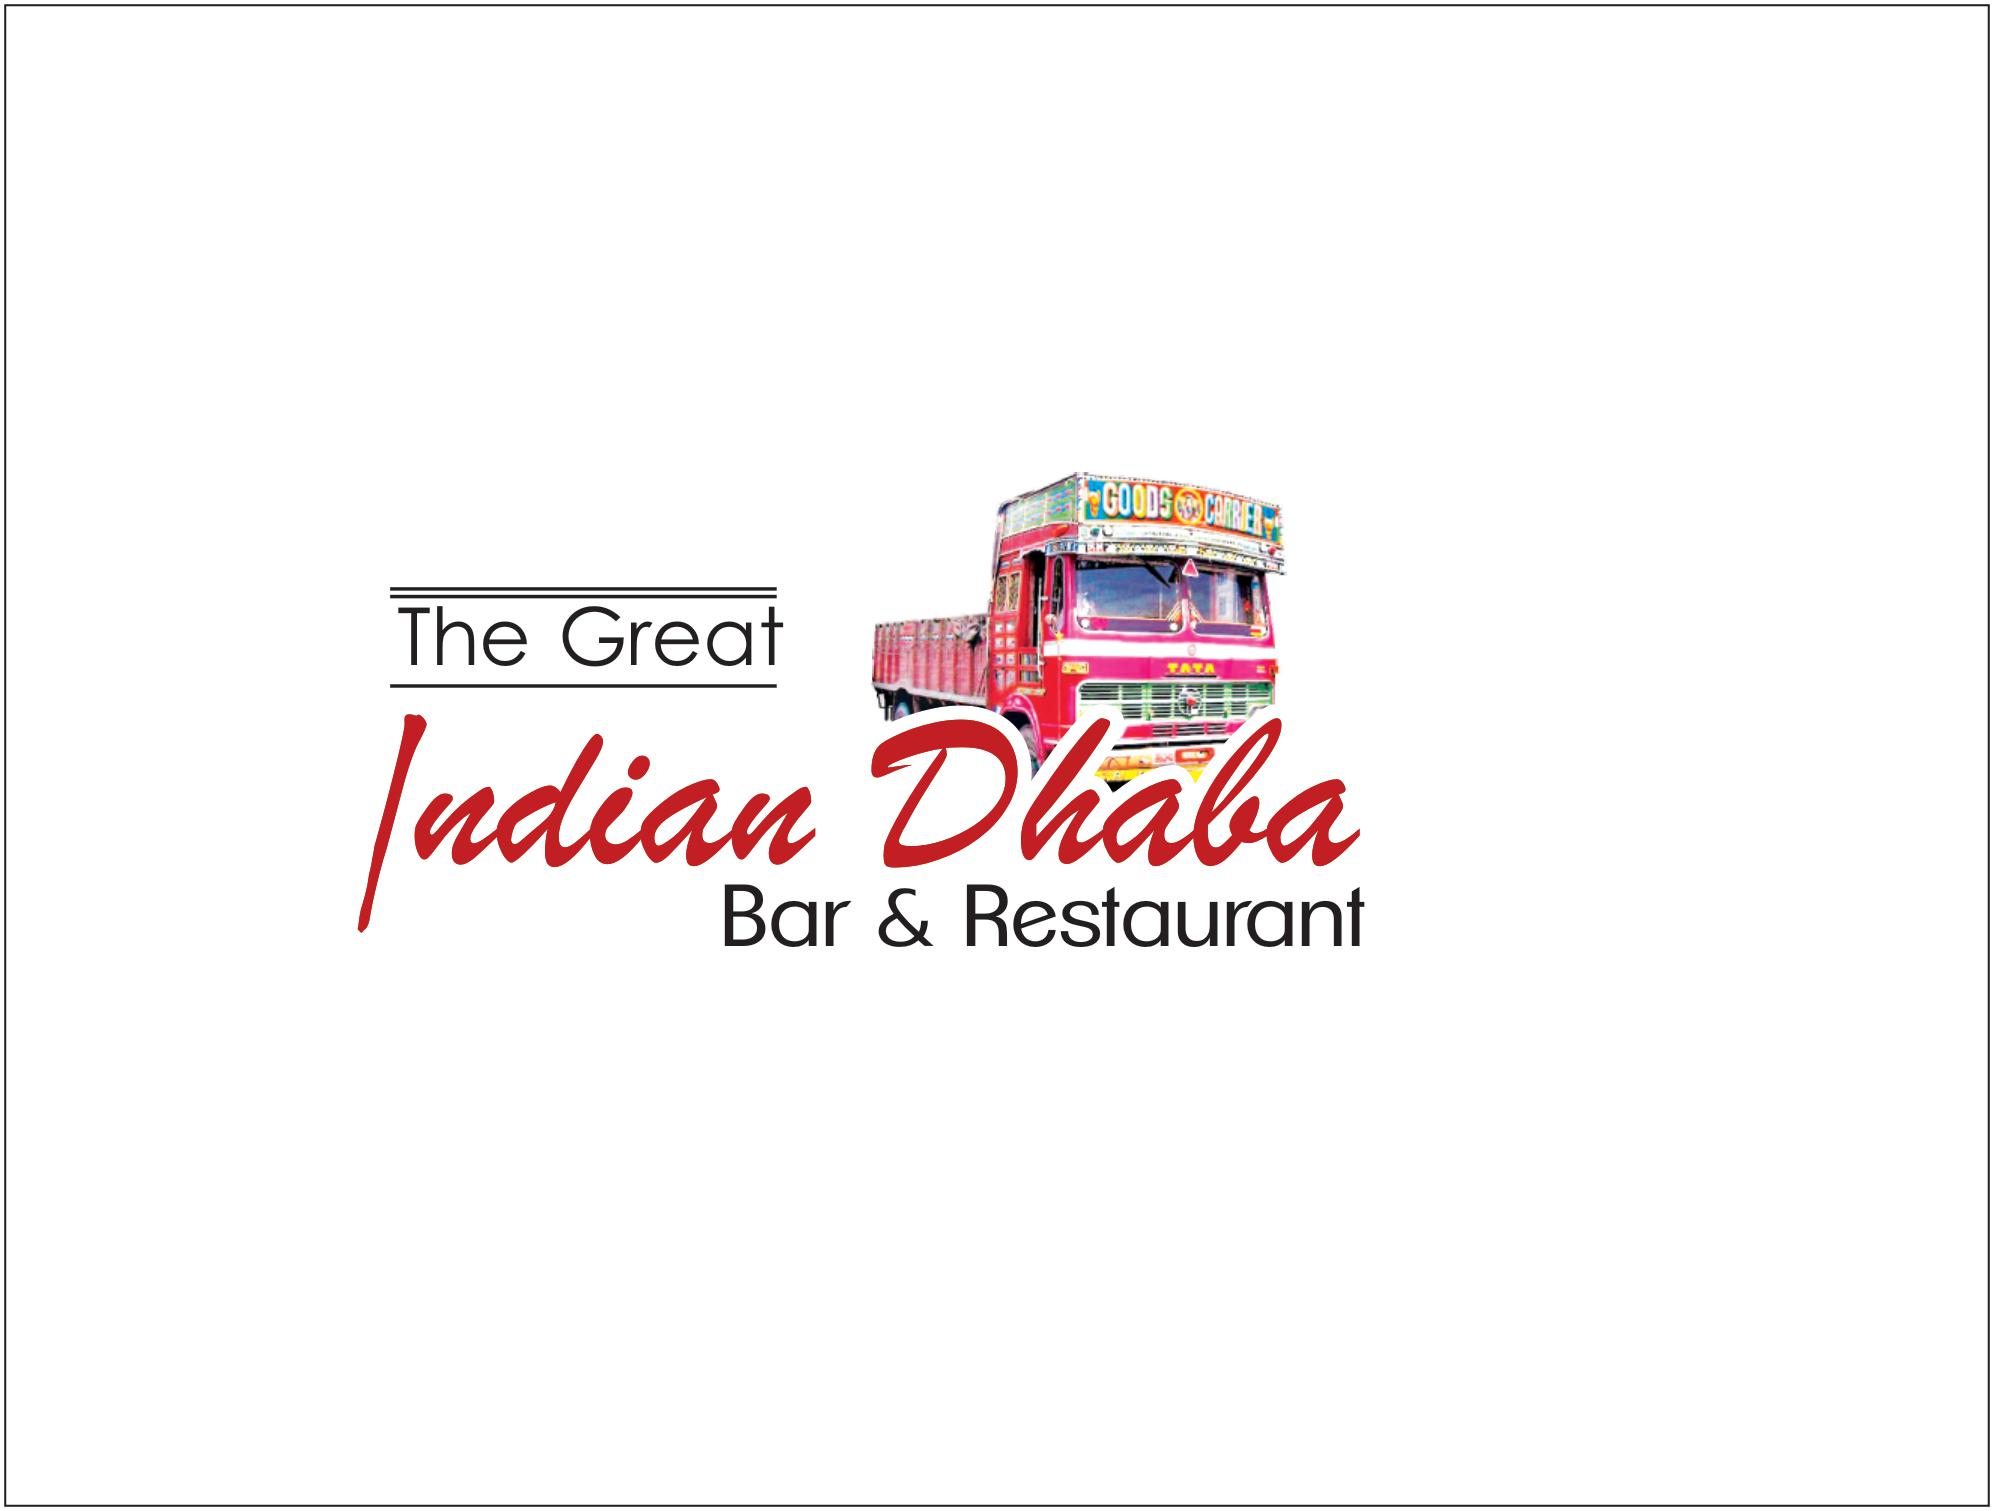 The Great Indian Dhaba Bar and Restaurant